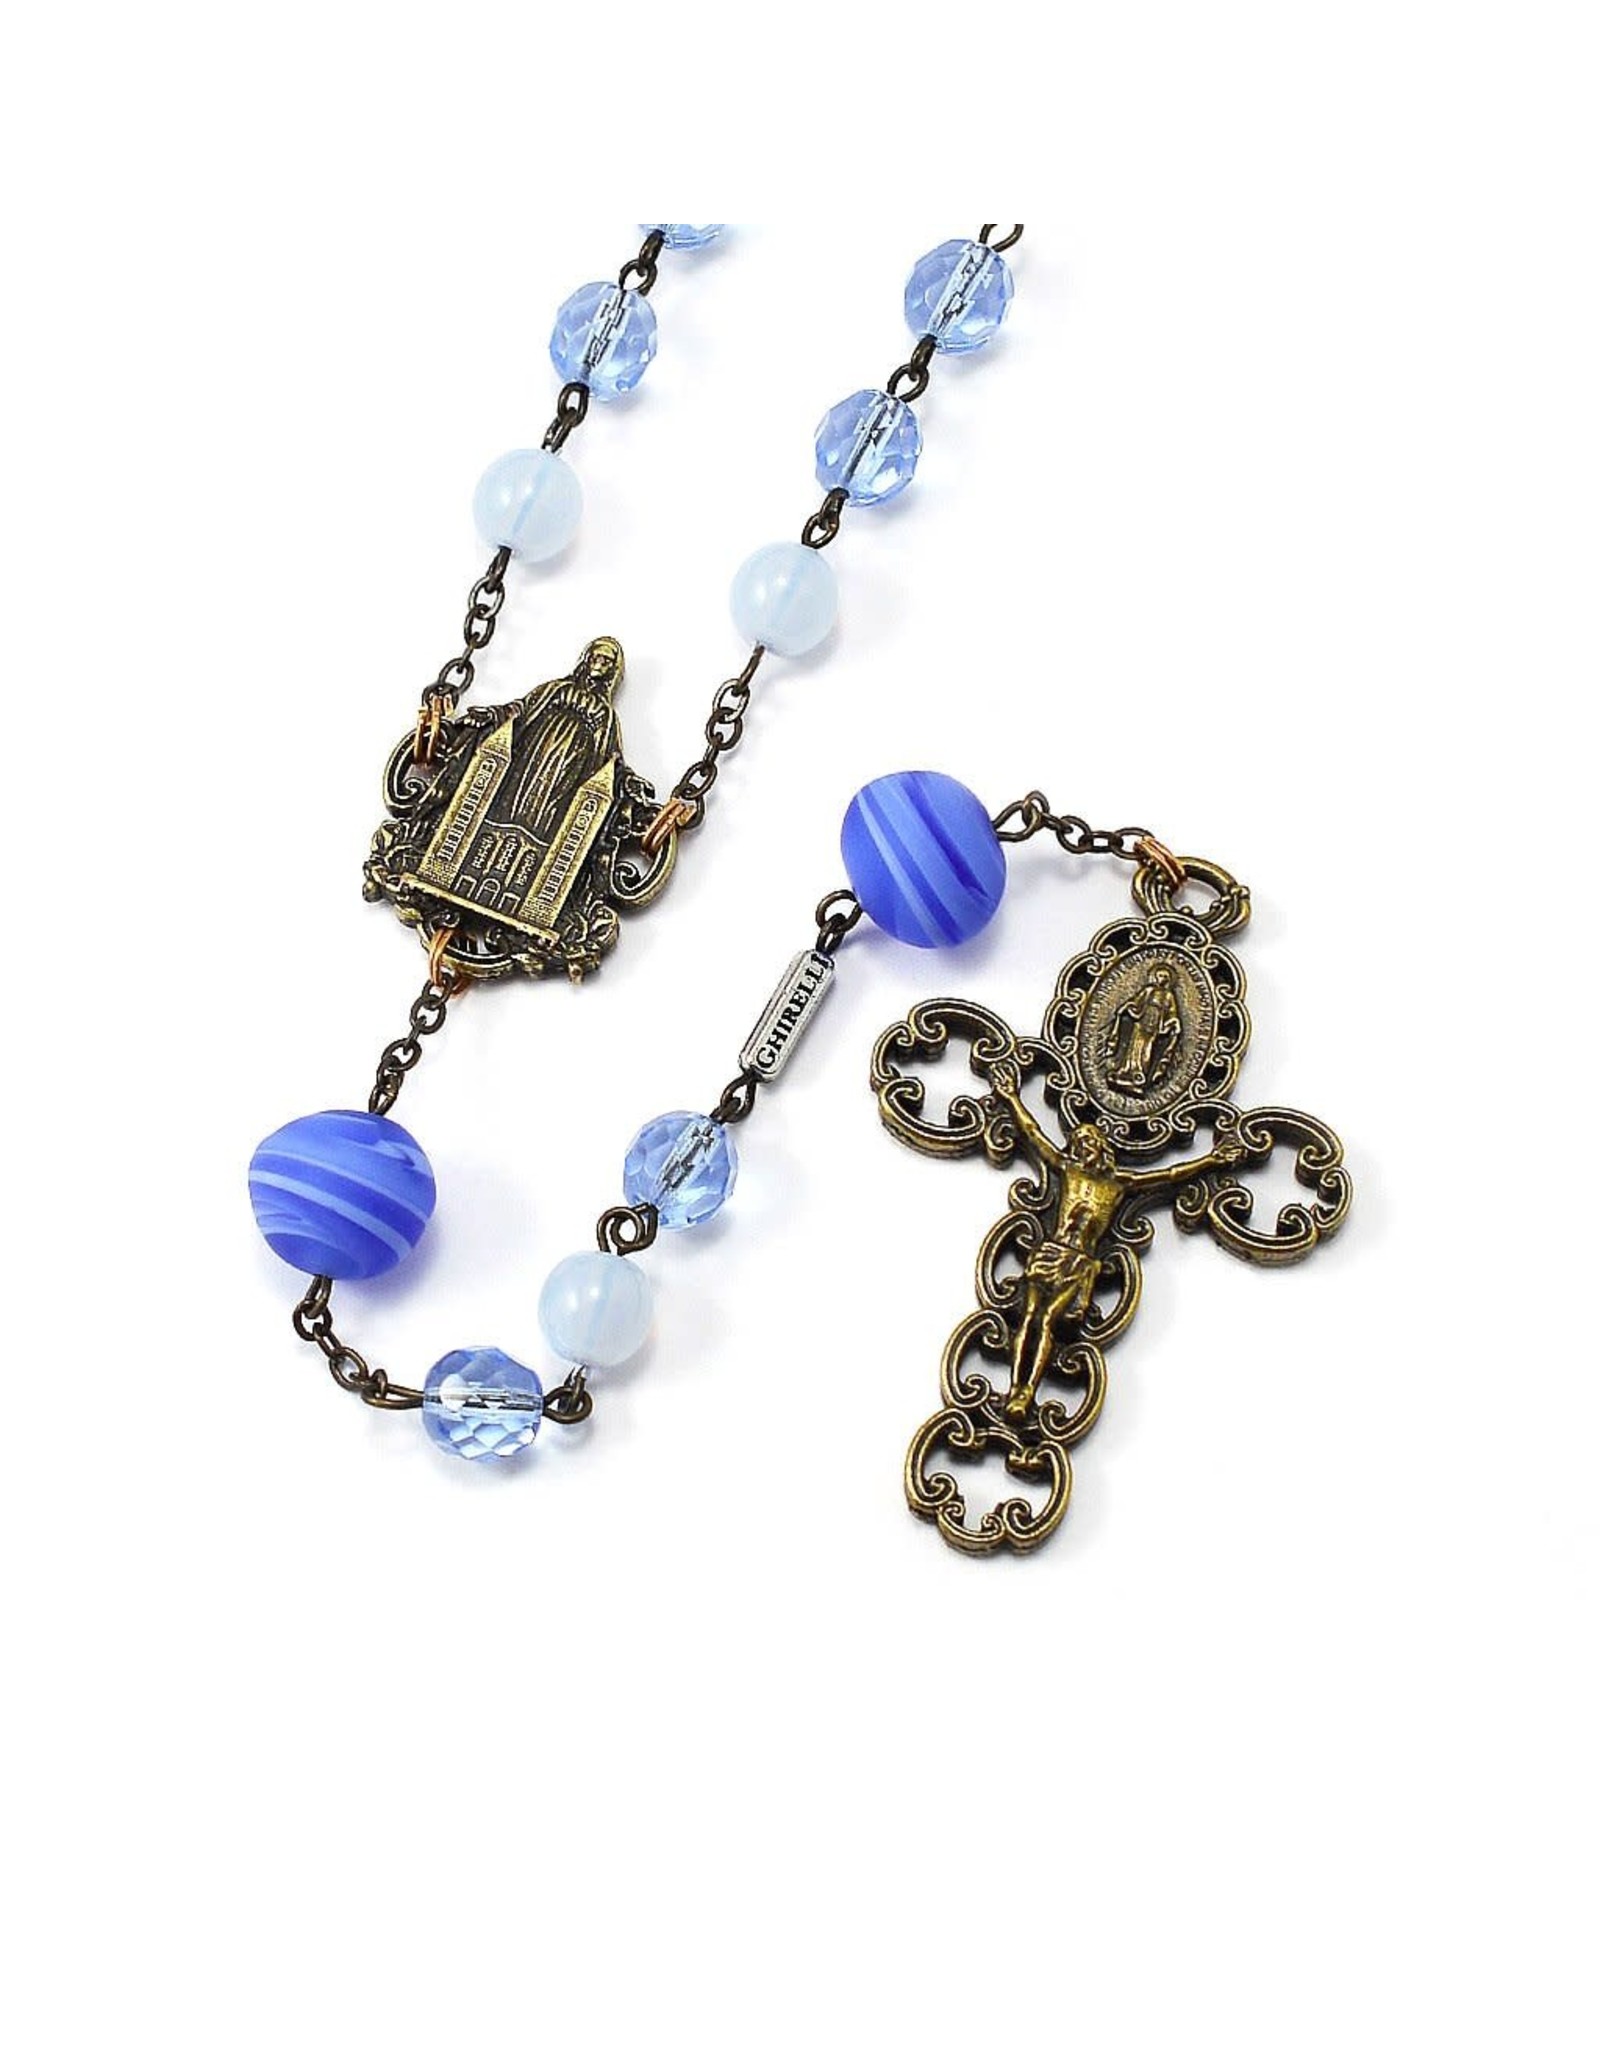 Ghirelli MEDJUGORJE QUEEN OF PEACE ROSARY WITH GENUINE MURANO BEAD, BLUE